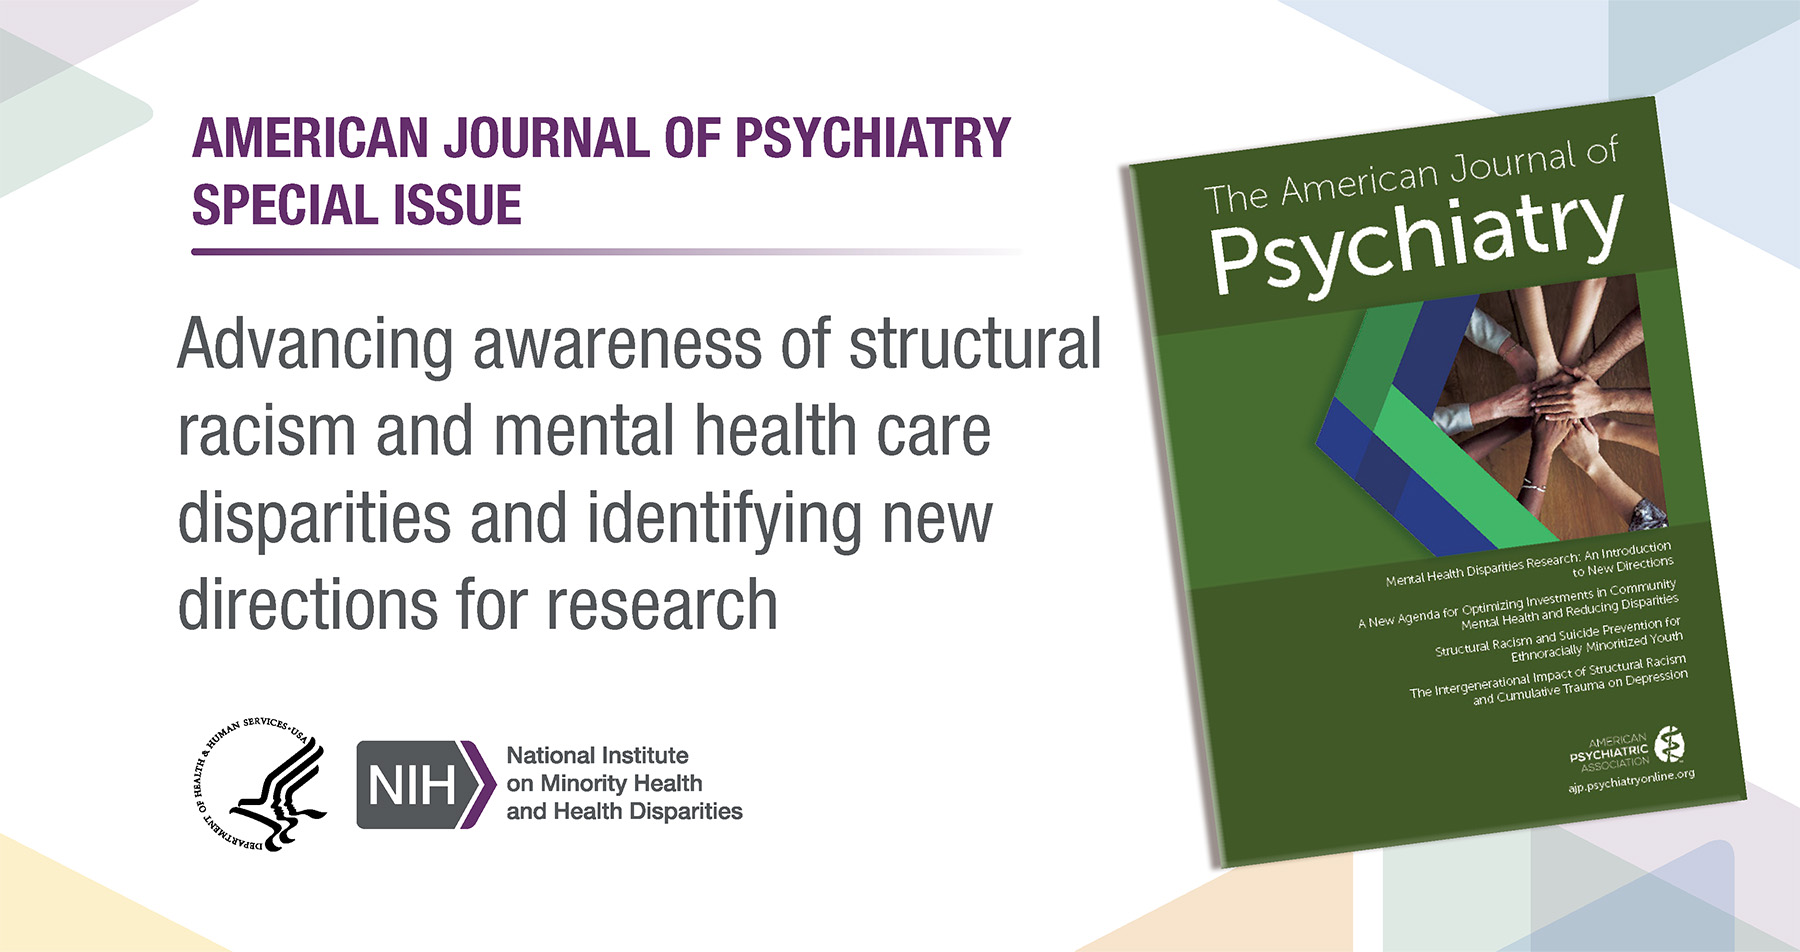 American Journal of Psychiatry special issue on new directions for structural racism and mental health disparities research.